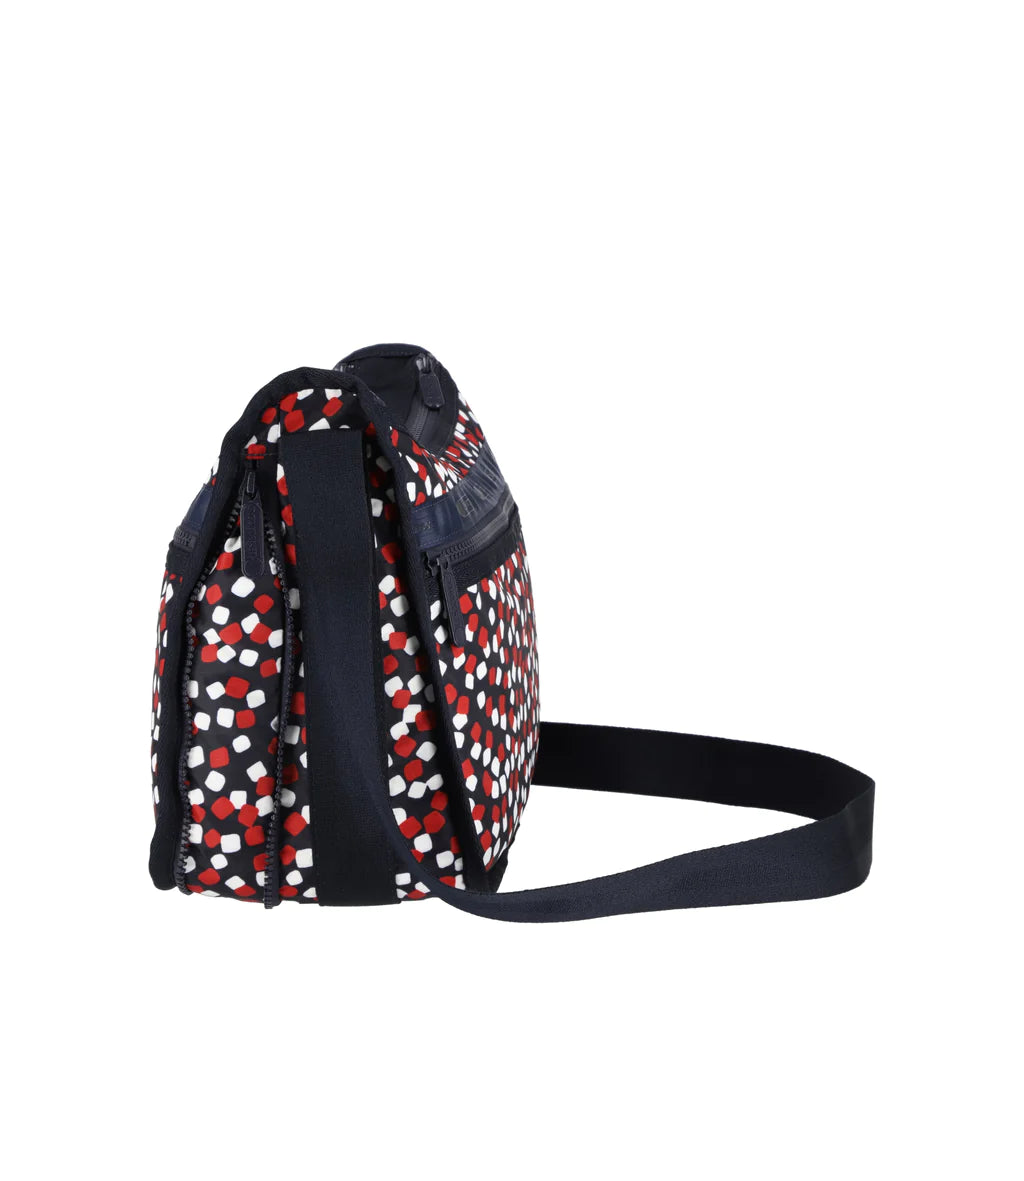 Deluxe Everyday Bag<br>LeSportsac x Libertine Speckle